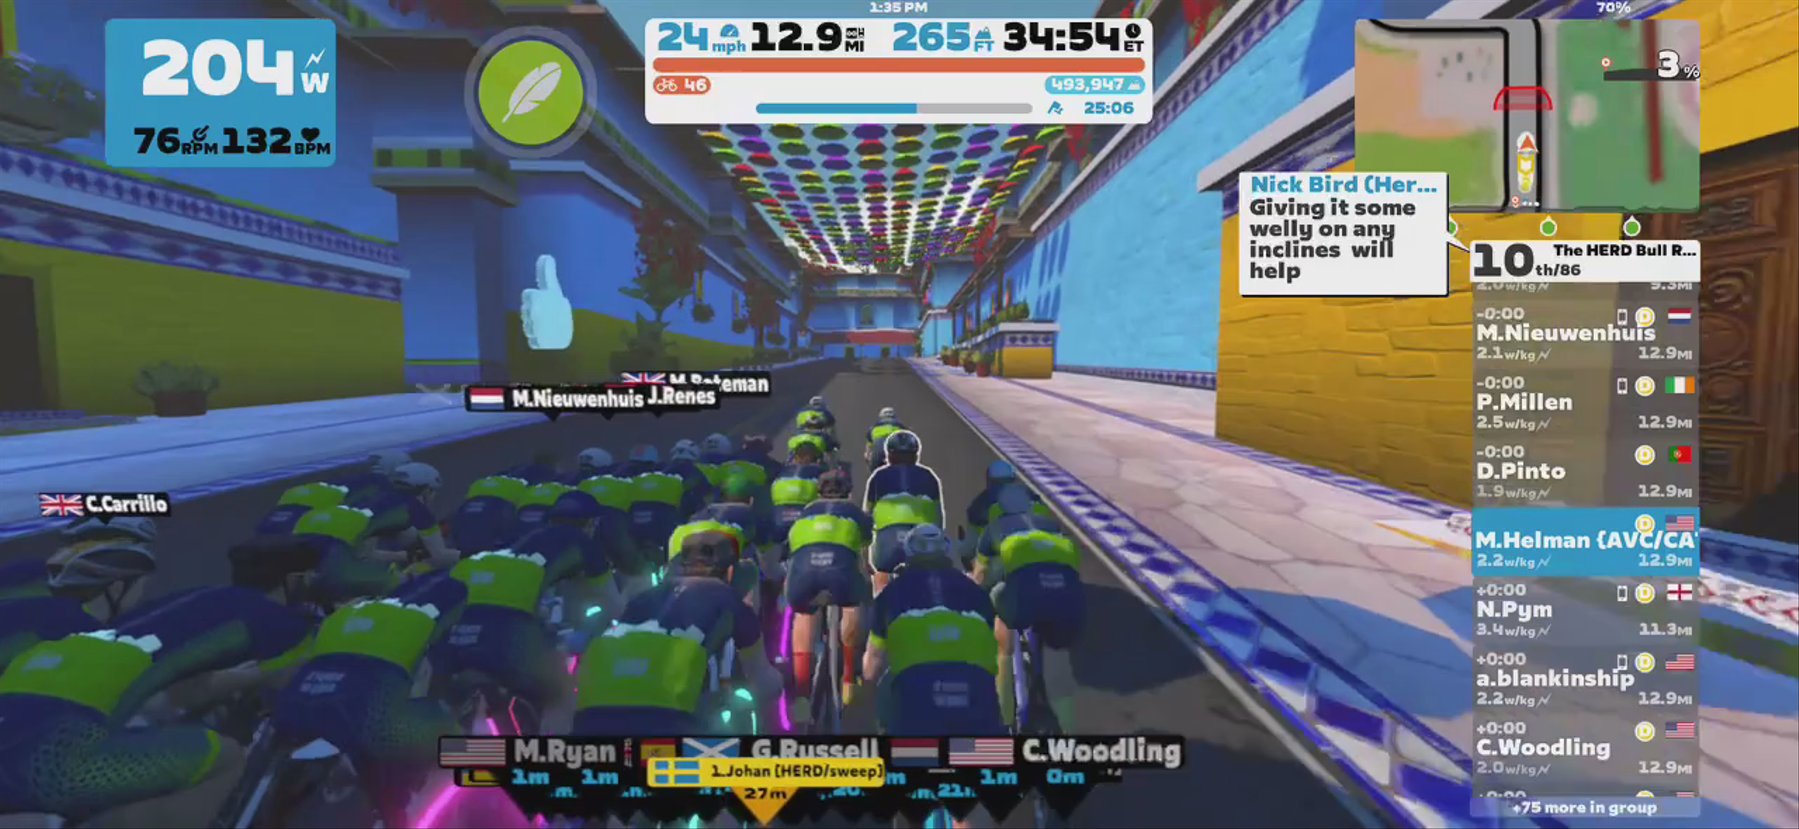 Zwift - Group Ride: The HERD Bull Run (D) on The Big Ring in Watopia